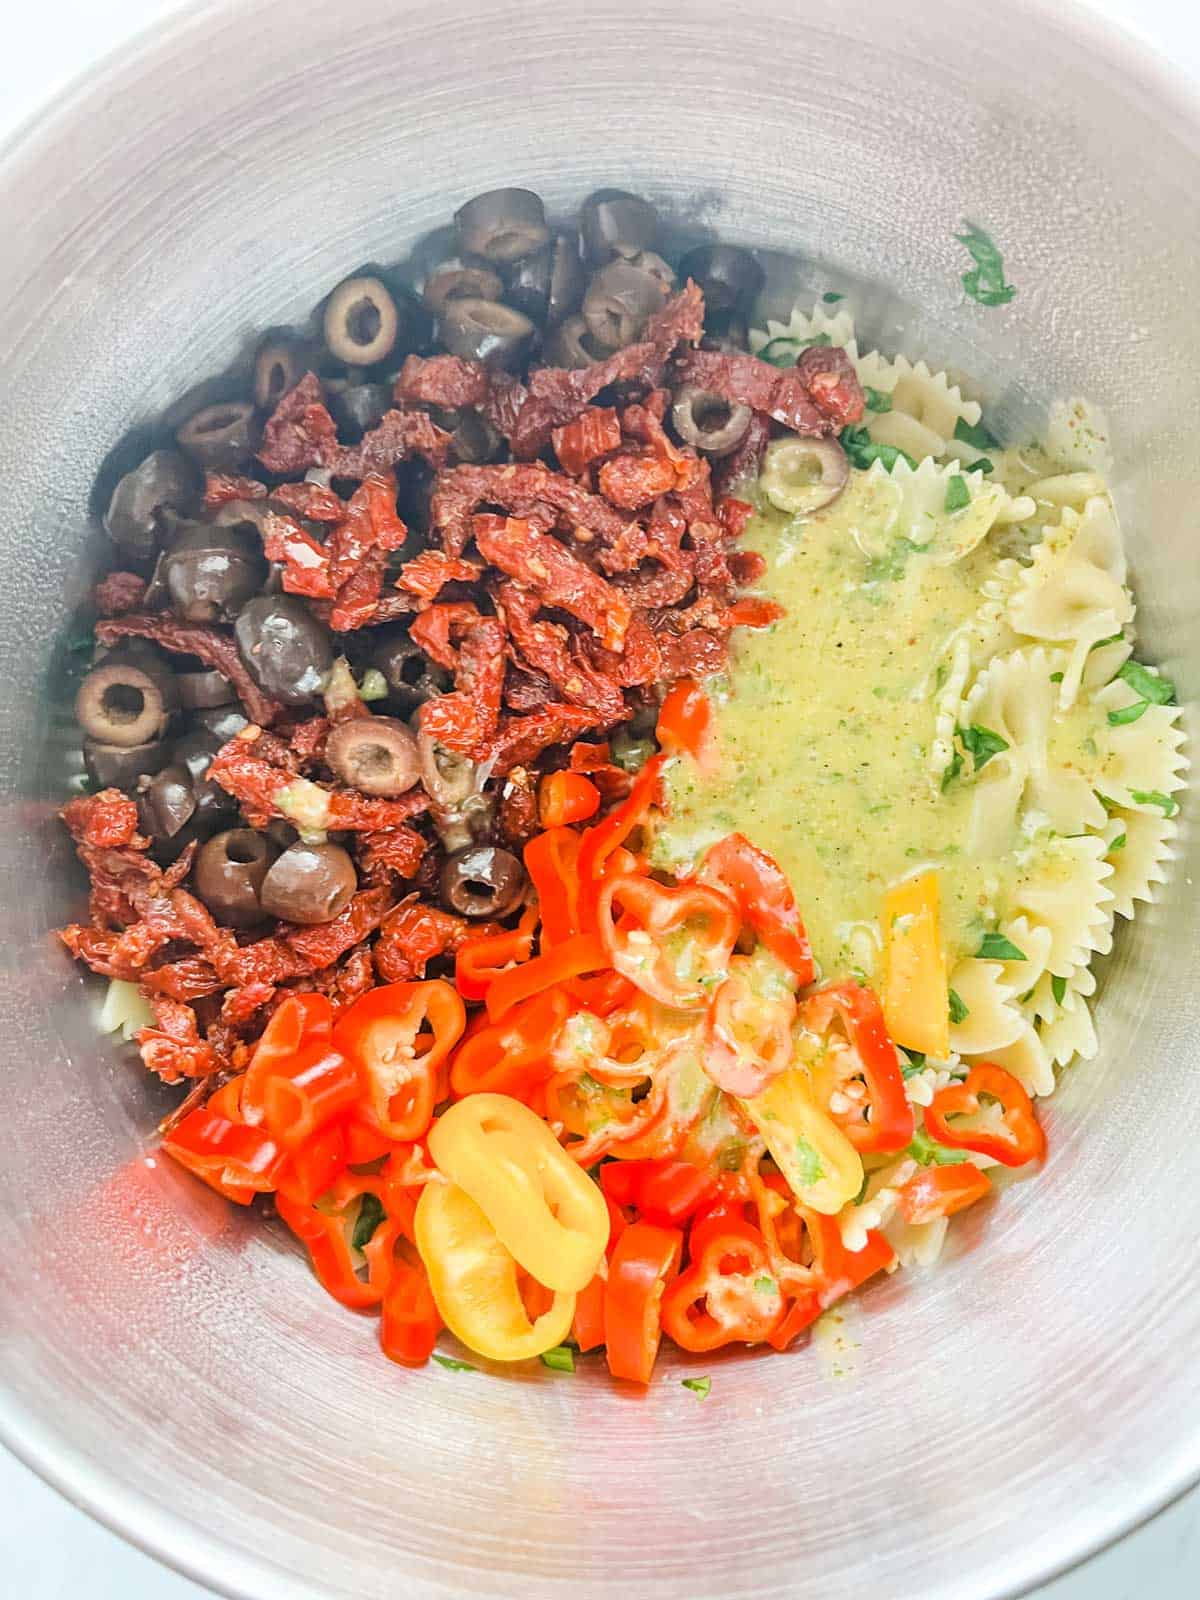 Cooked pasta, olives, sun dried tomatoes, sliced baby peppers and homemade salad dressing in a large bowl.